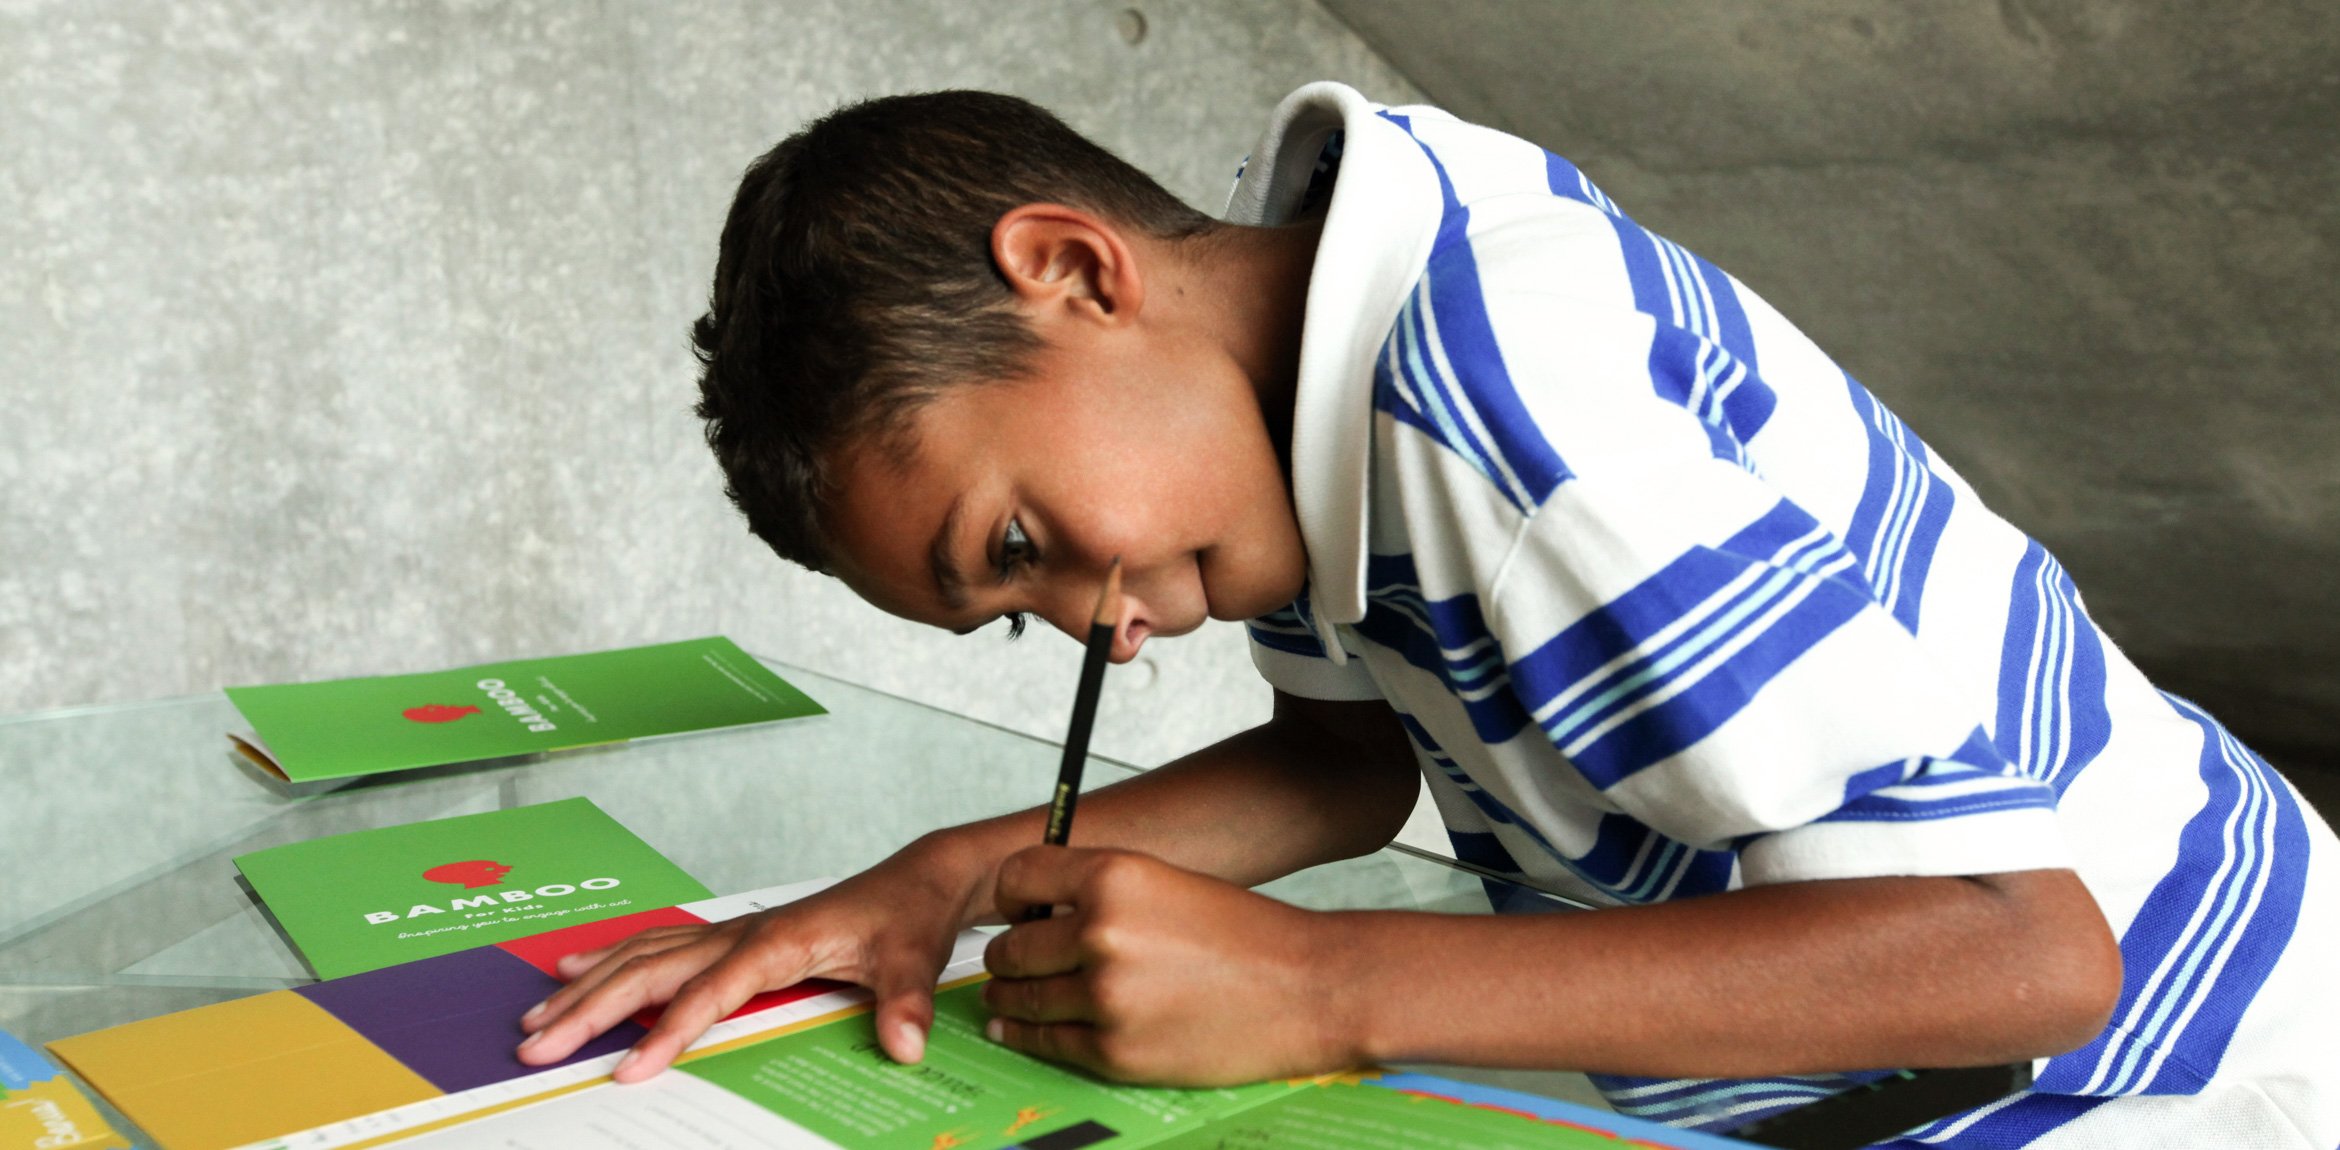 A child leaning over a activity guide while working on it.